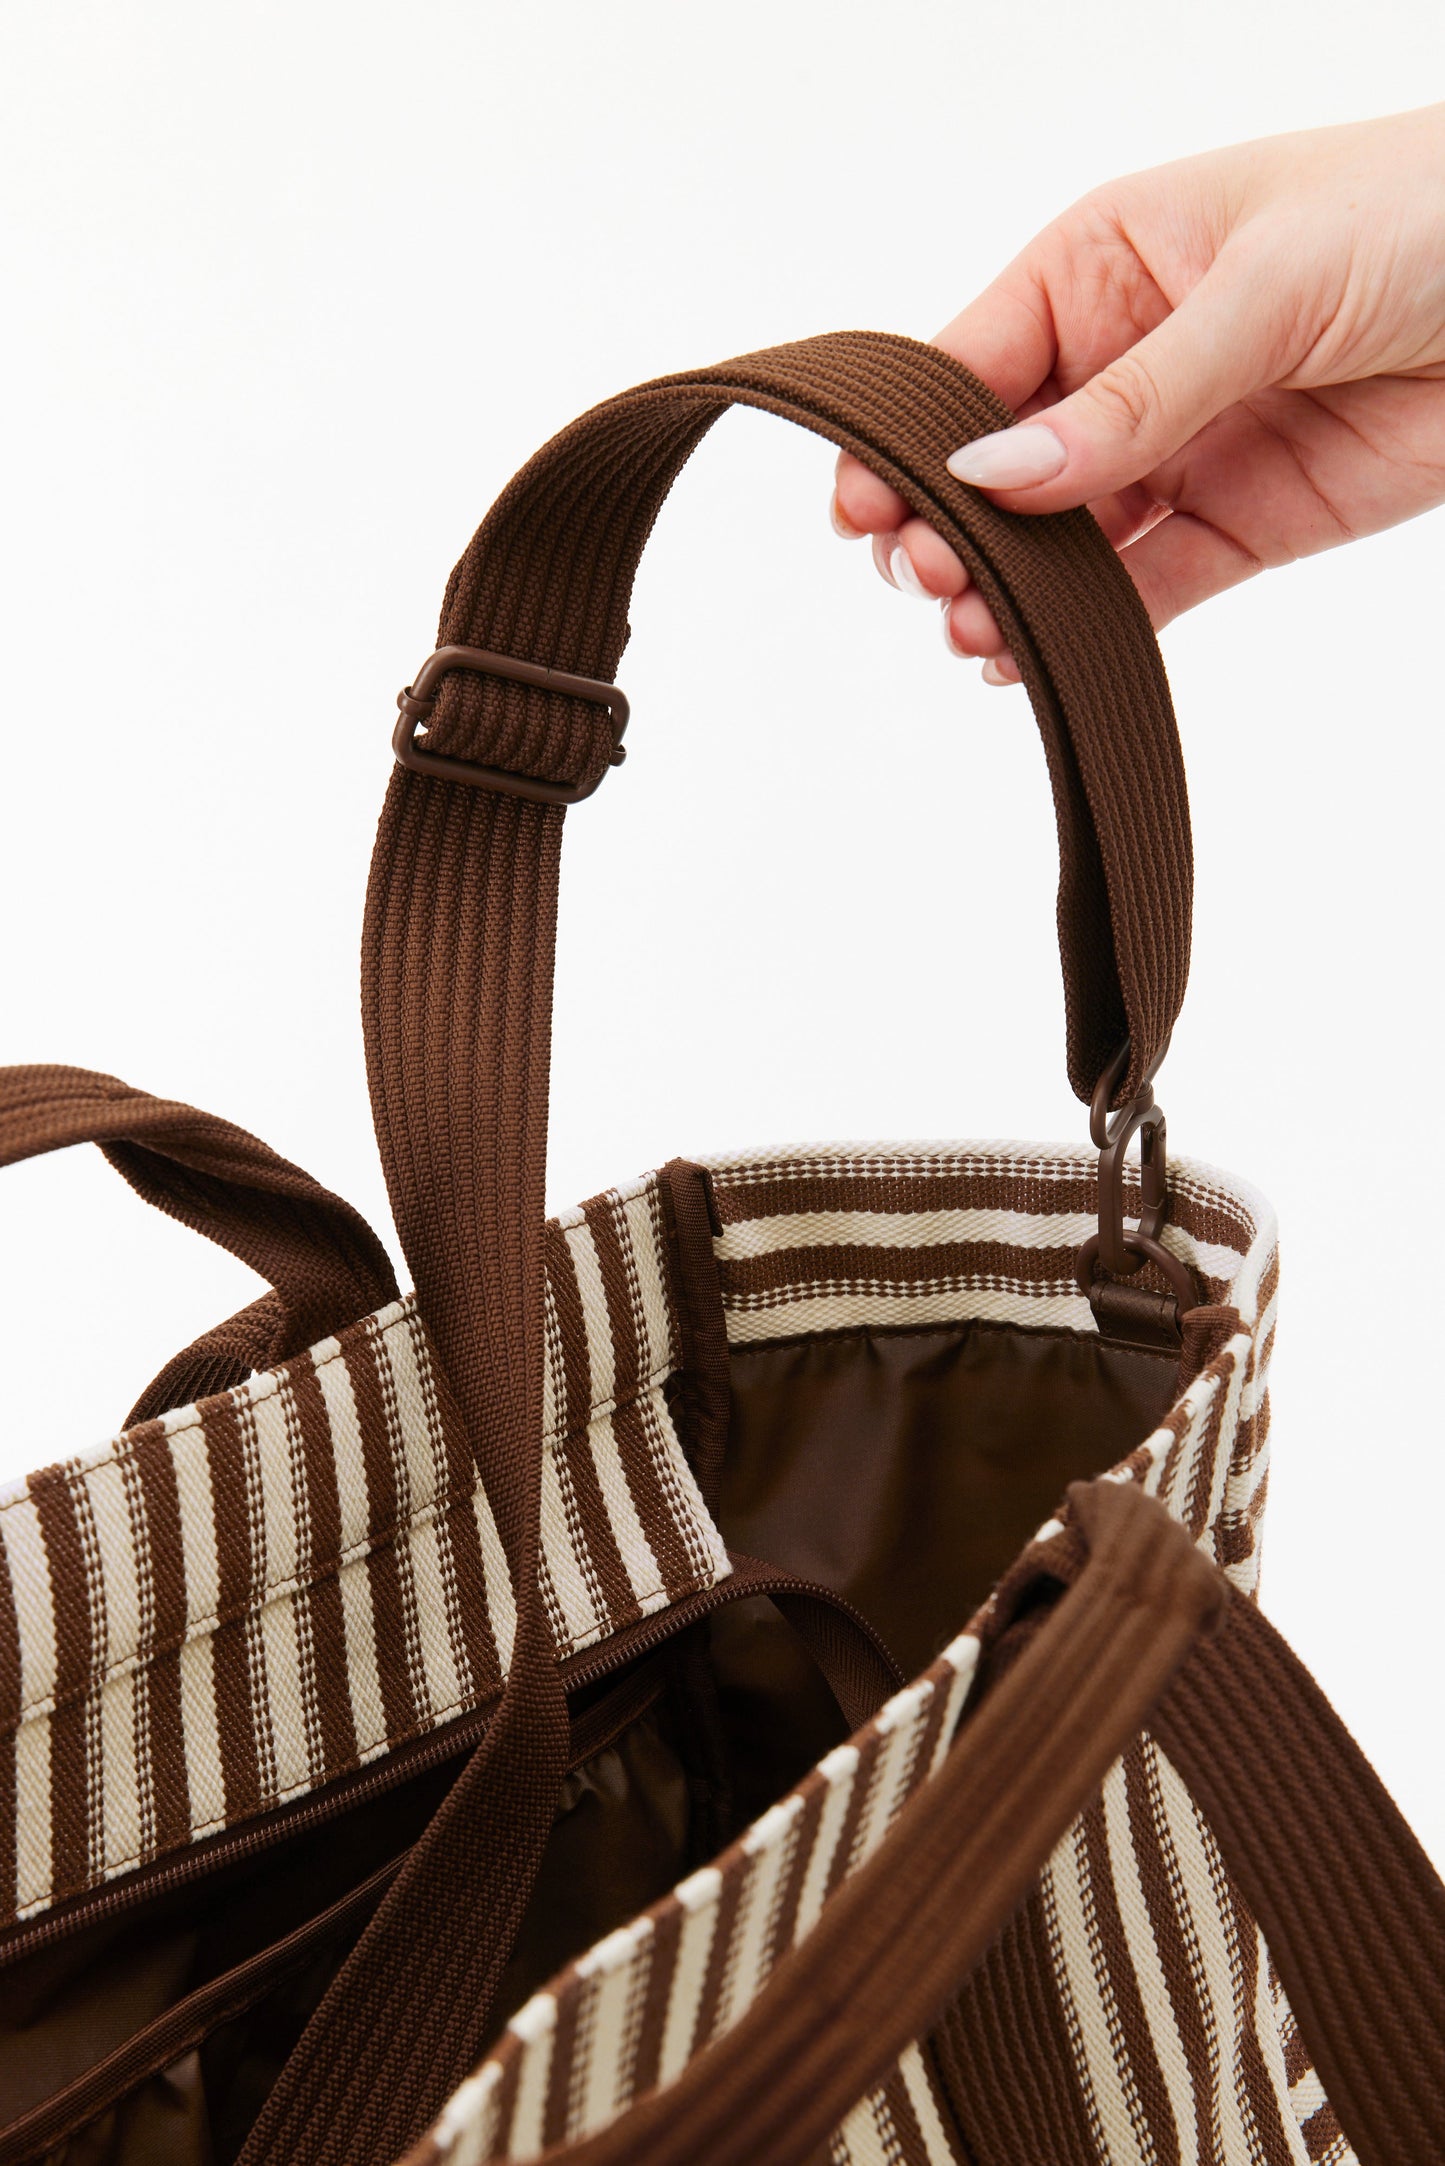 The Vacation Tote in Maple Stripe